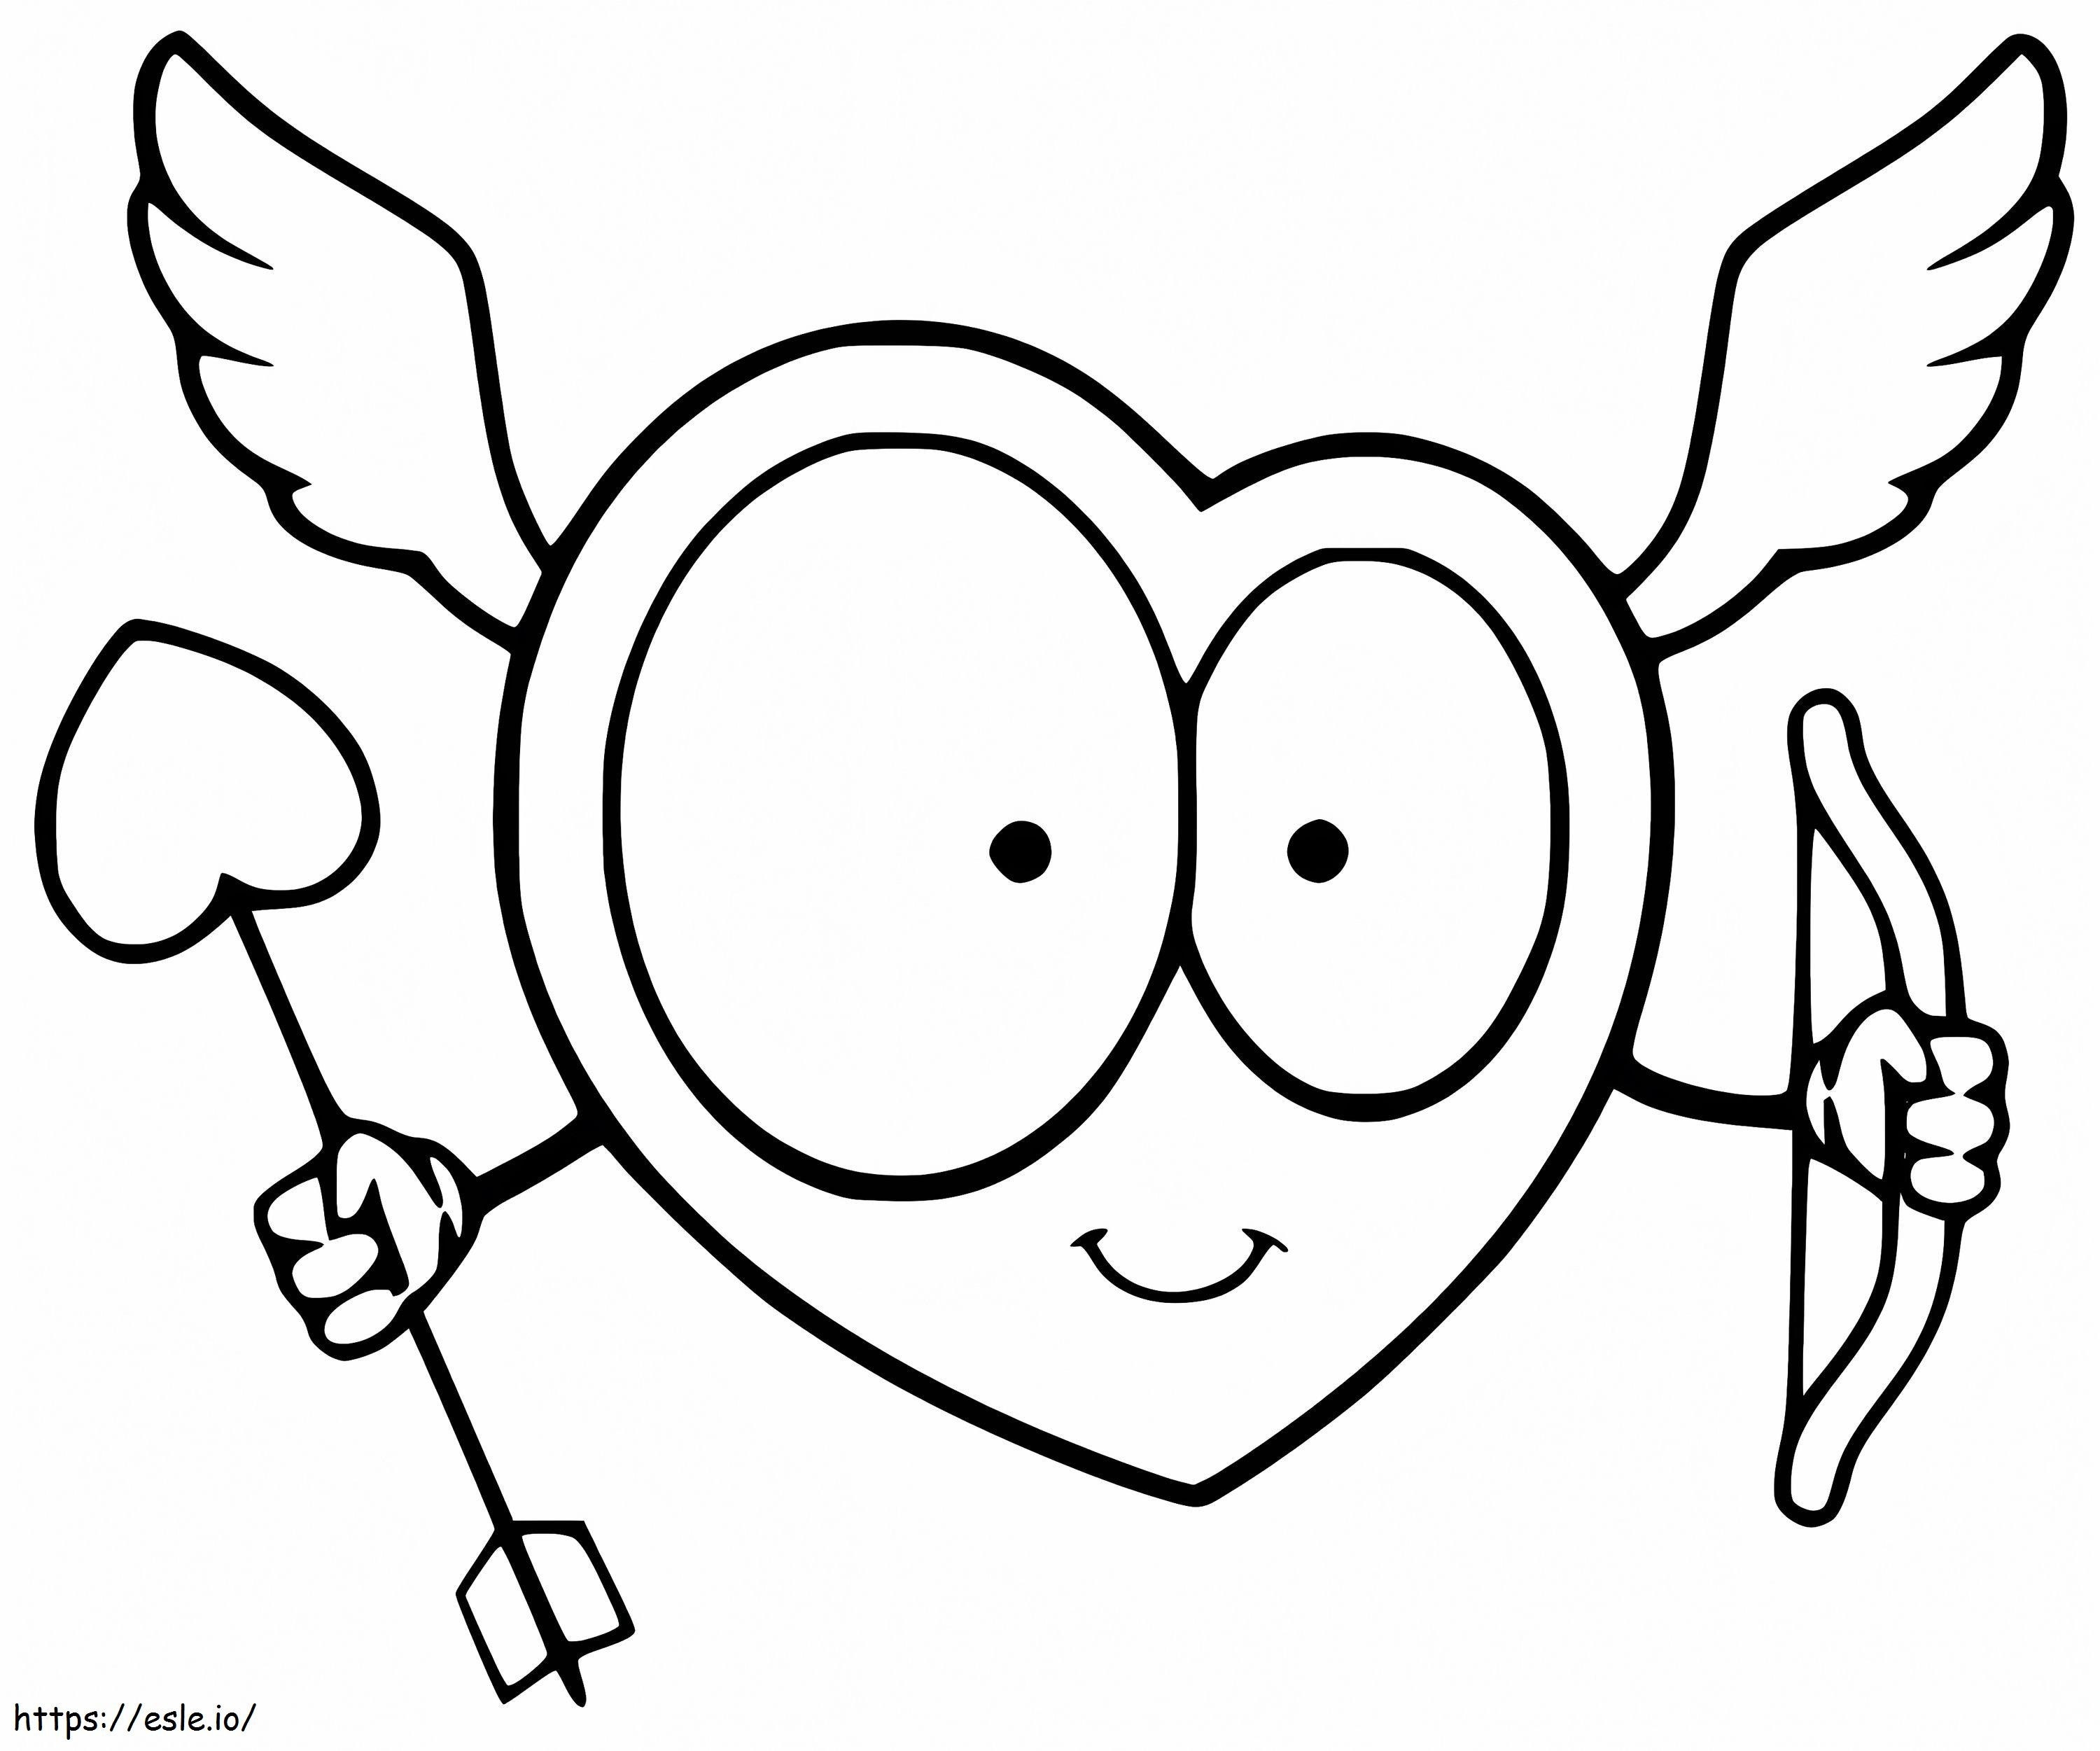 Heart Cupid coloring page